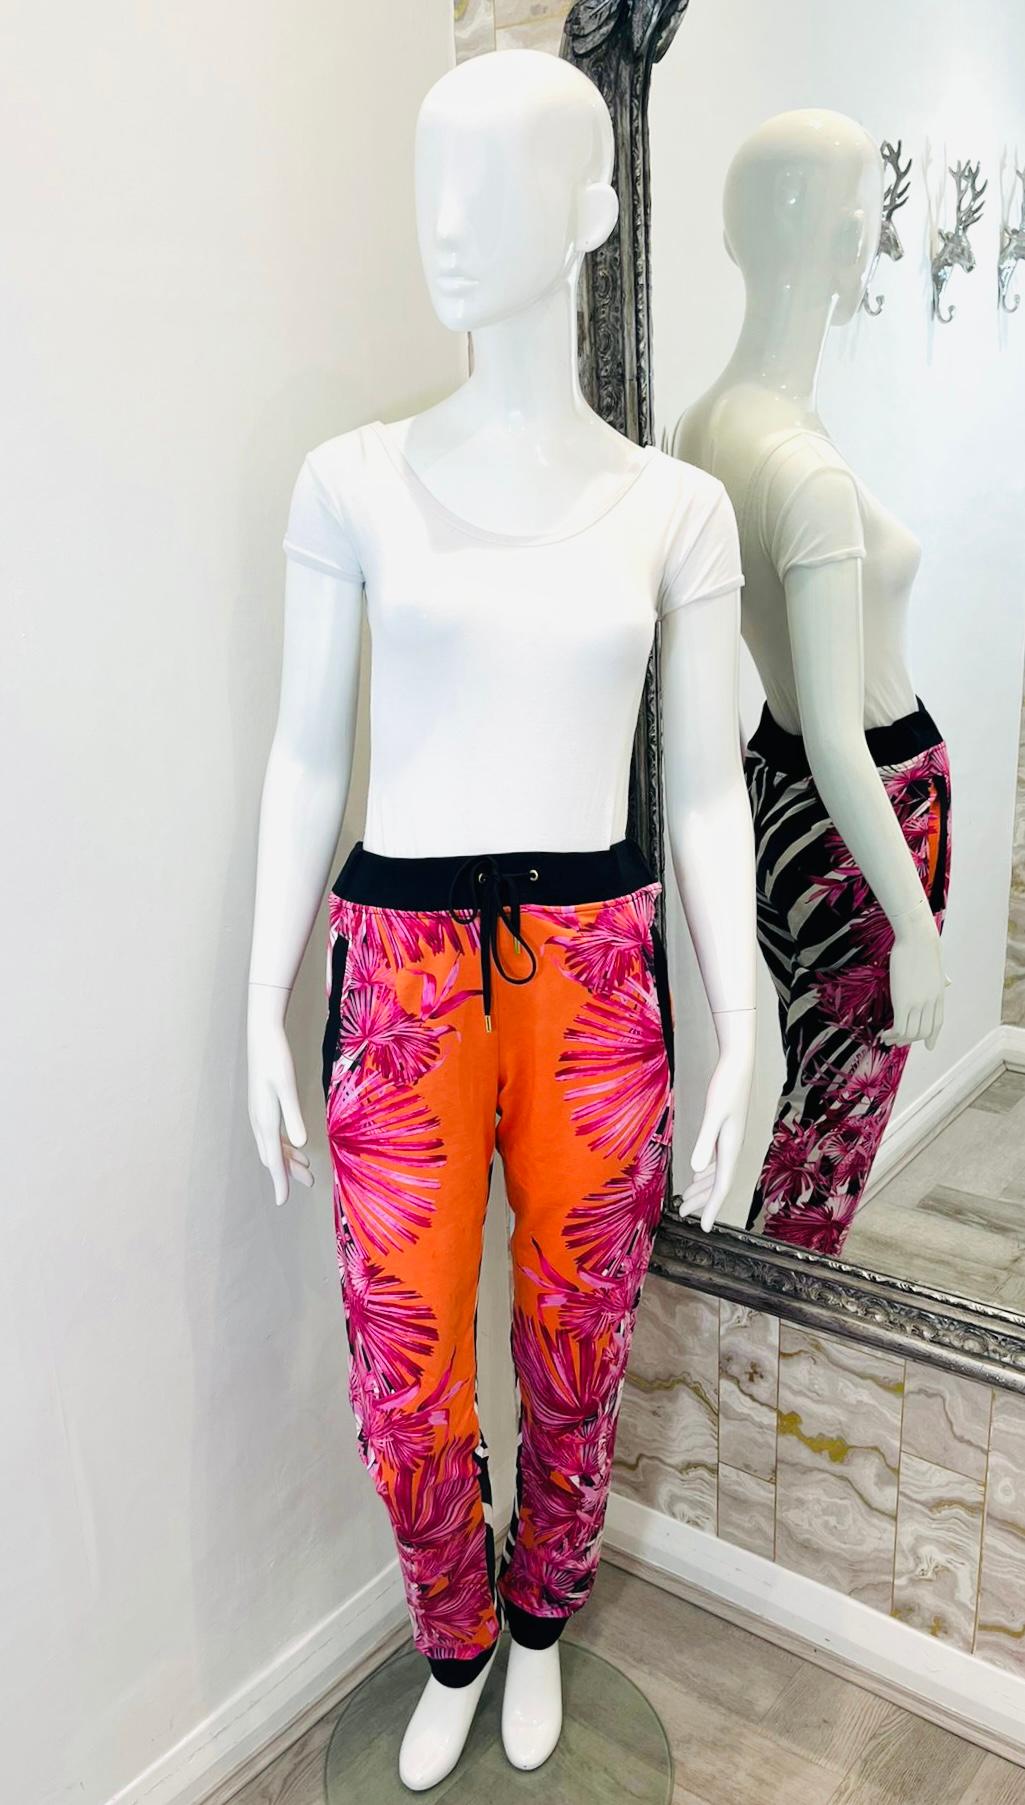 Versus Versace Printed Cotton Trousers

Multicoloured, relaxed fit trousers designed with pink floral prints to the front and contrasting zebra pattern to rear.

Detailed with elastic, drawstring waistband and black trimmed cuffs and side